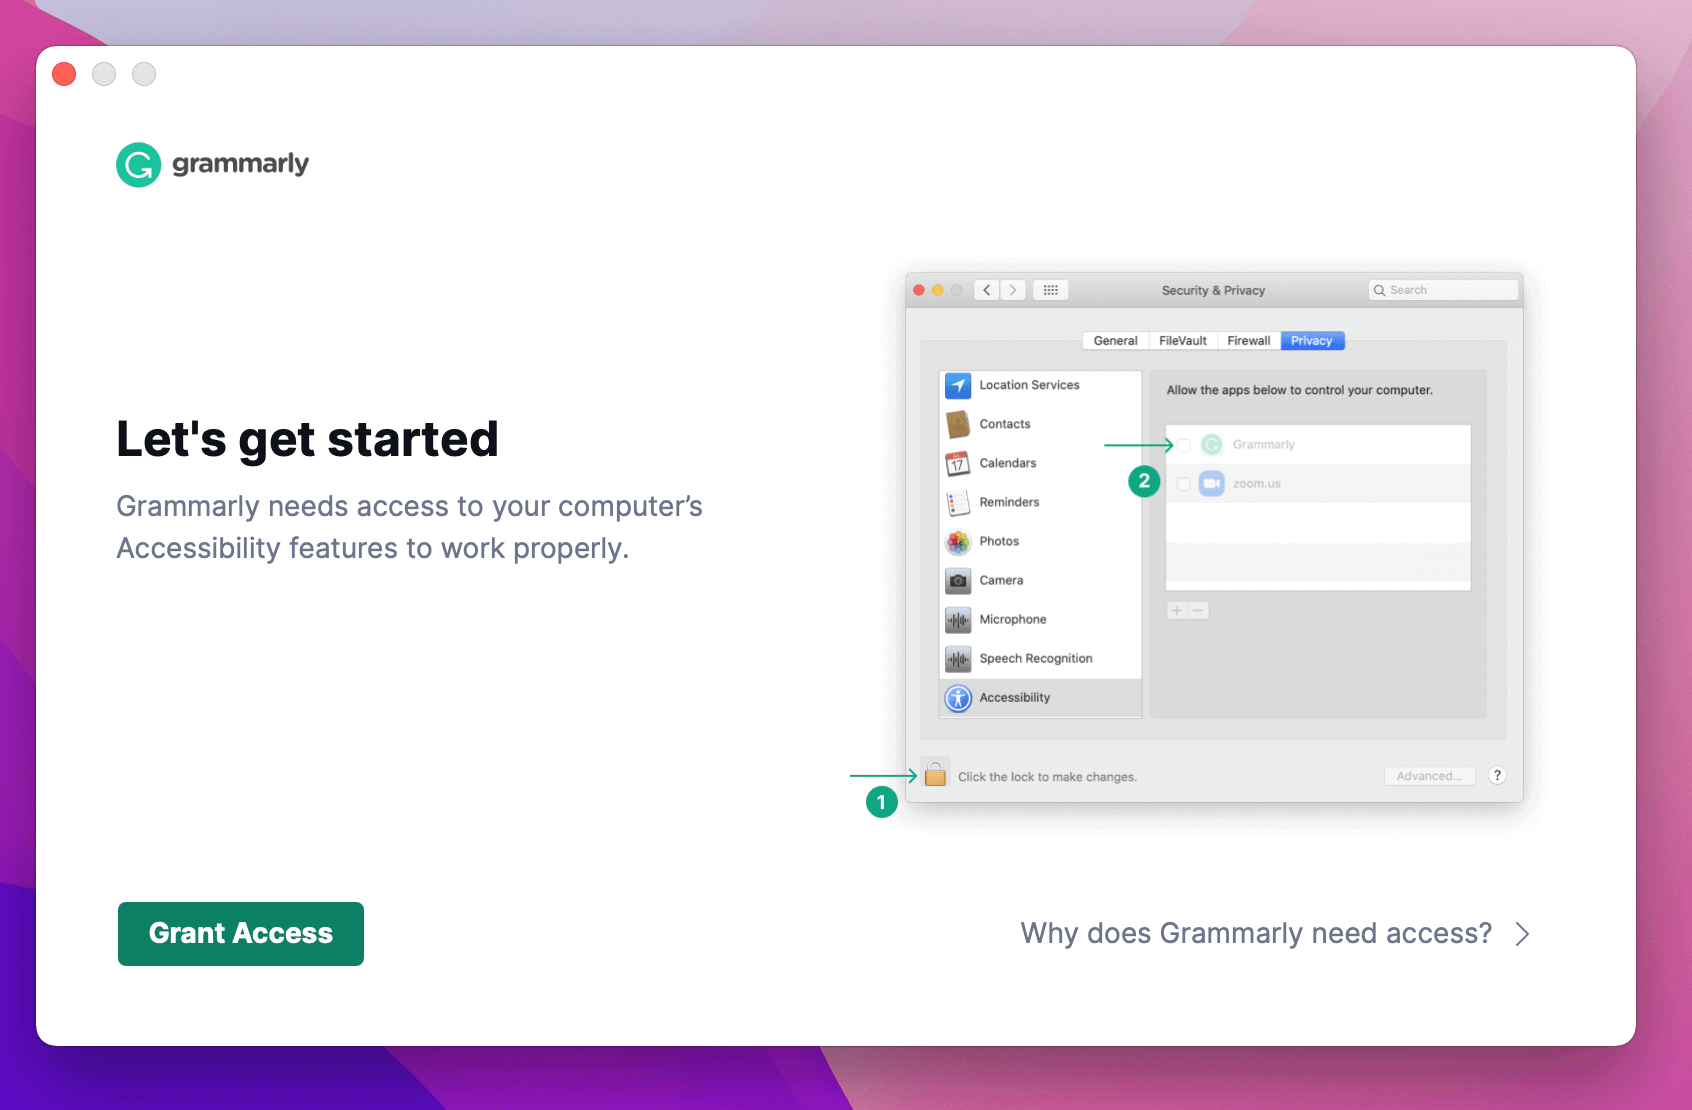 A screenshot of the installation screen for the macOS version of the Grammarly app. The screenshot asks the user to add Grammarly to the list of apps with accessibility permissions and offers a button to kick off that process.